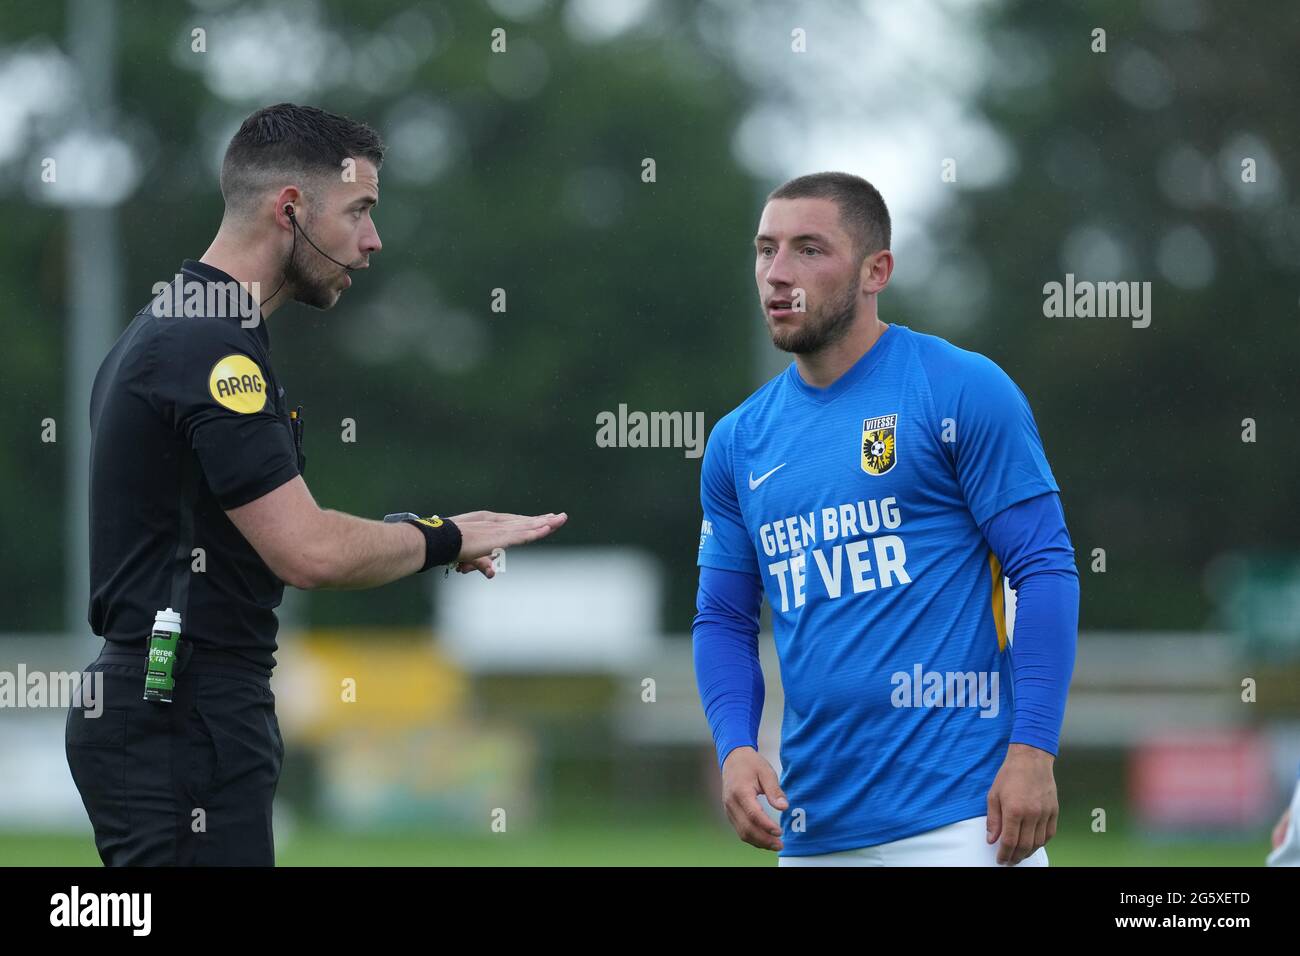 BURGH-HAAMSTEDE, NETHERLANDS - JUNE 30: Maximilian Wittek of Vitesse during the Pre Season Friendly match between Vitesse and AEK Athens at Sportpark van Zuijen on June 30, 2021 in Burgh-Haamstede, Netherlands (Photo by Yannick Verhoeven/Orange Pictures) Stock Photo